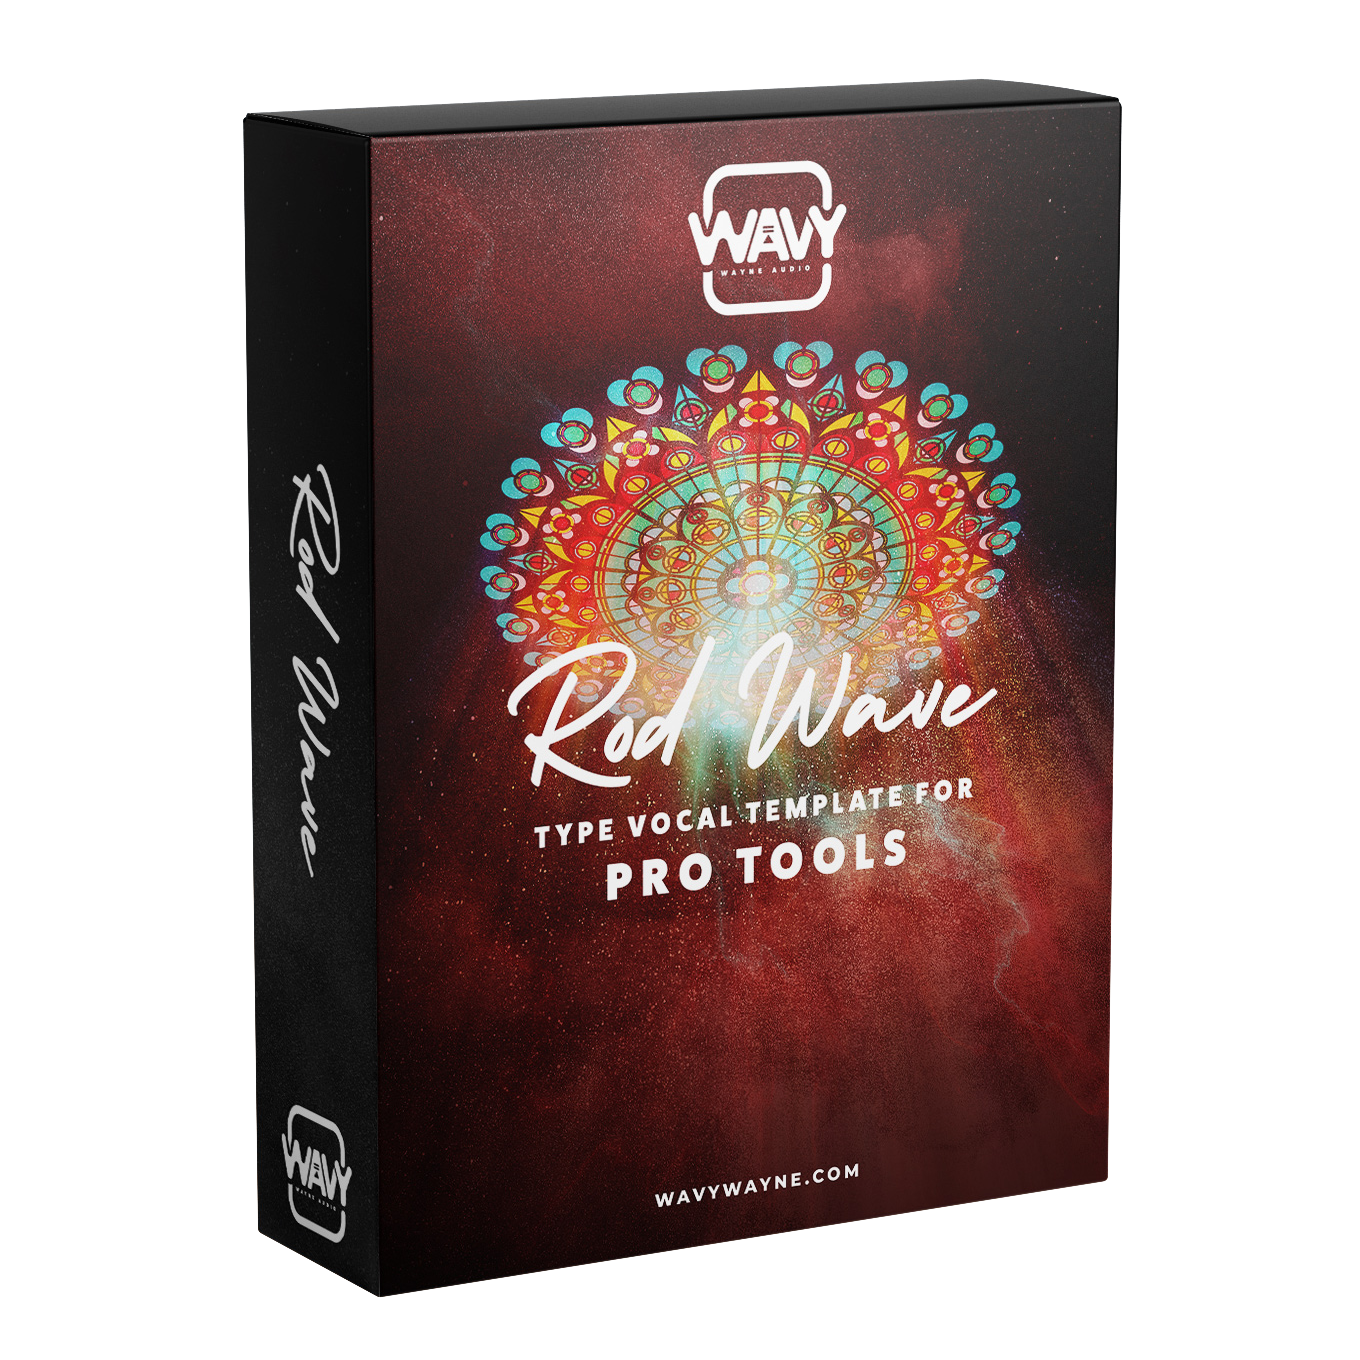 Rod Wave Type Vocal Template for Pro Tools